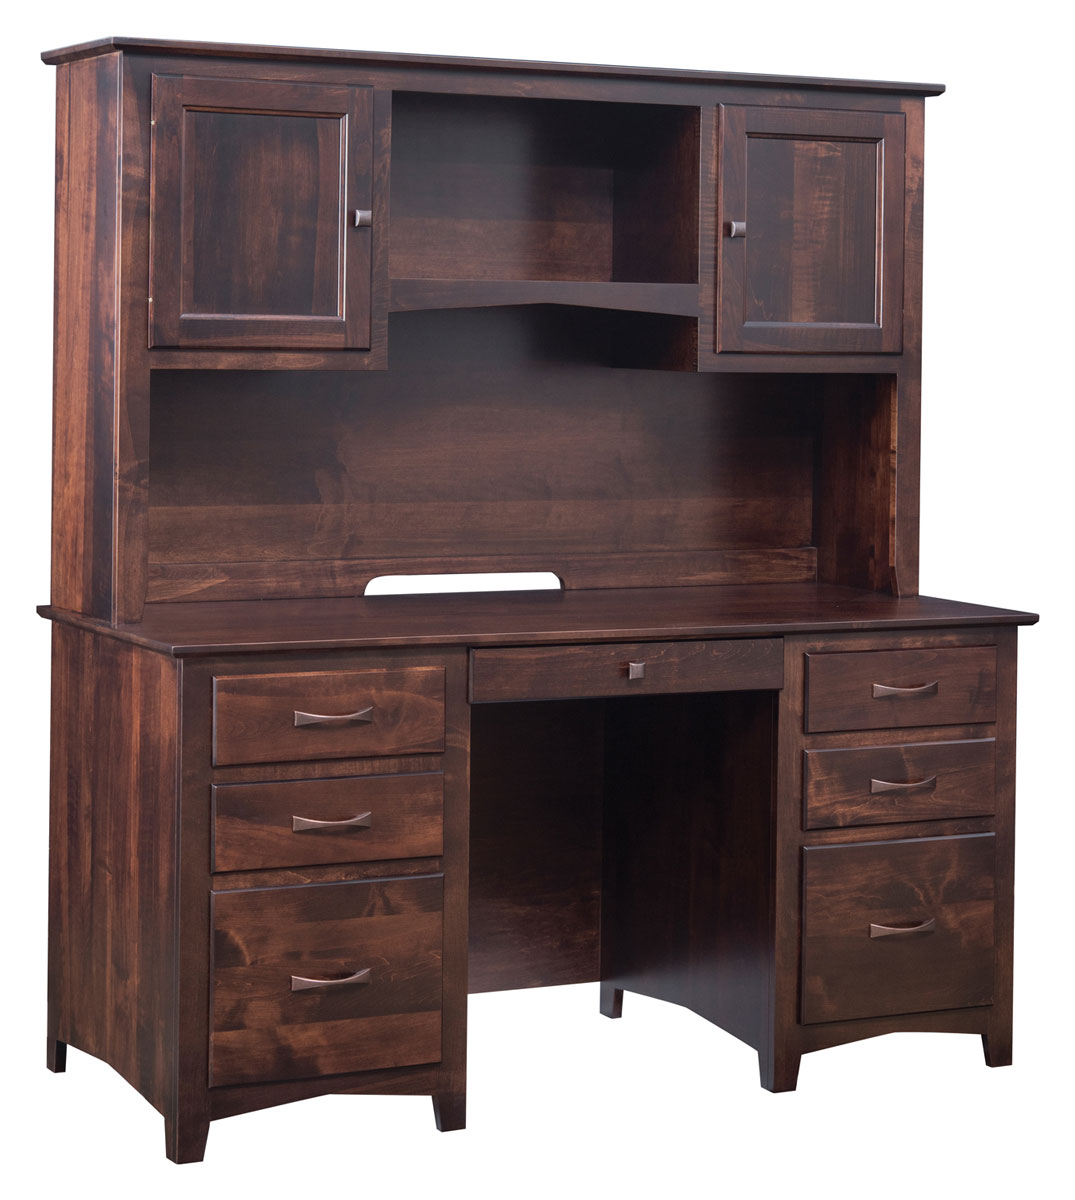 Linwood 60 inch Executive Desk with Linwood 60 inch Hutch